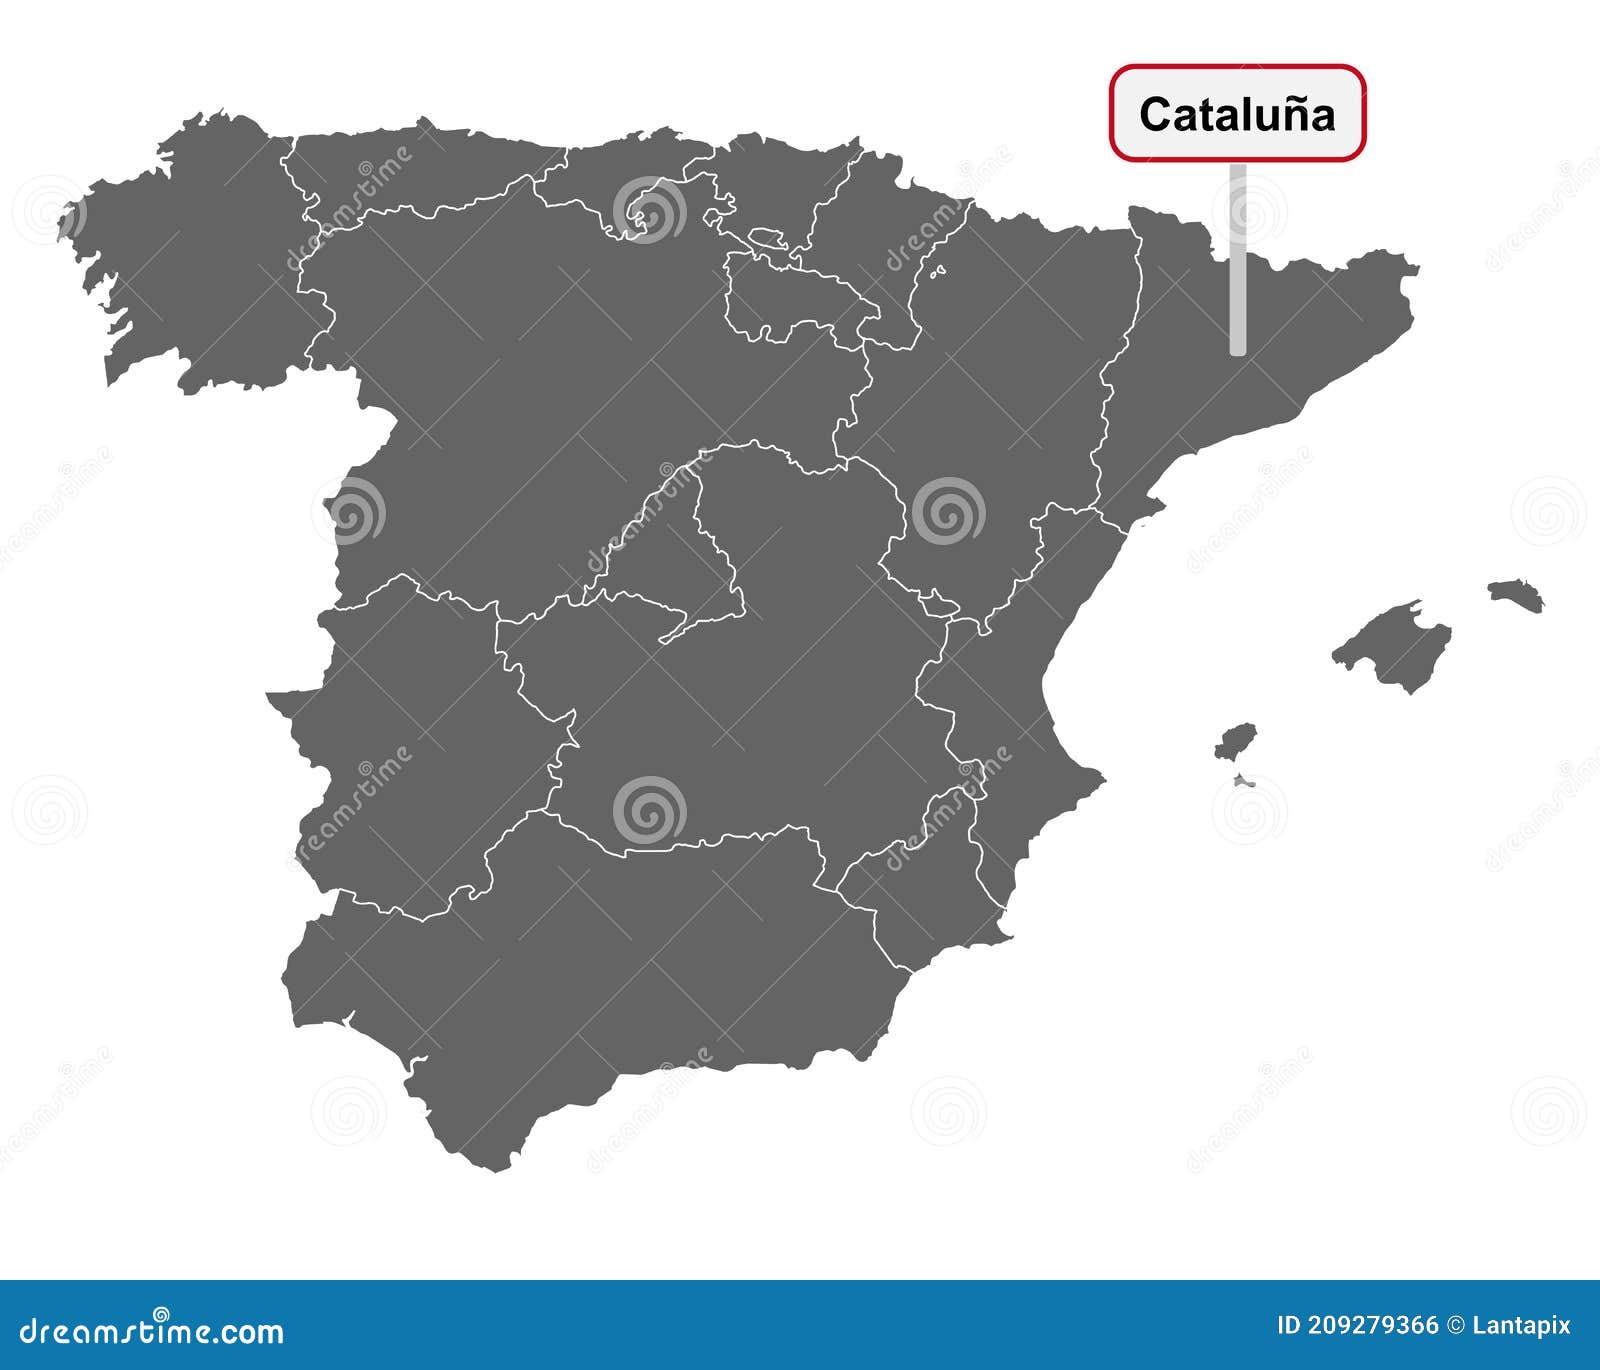 map of spain with place name sign of cataluna